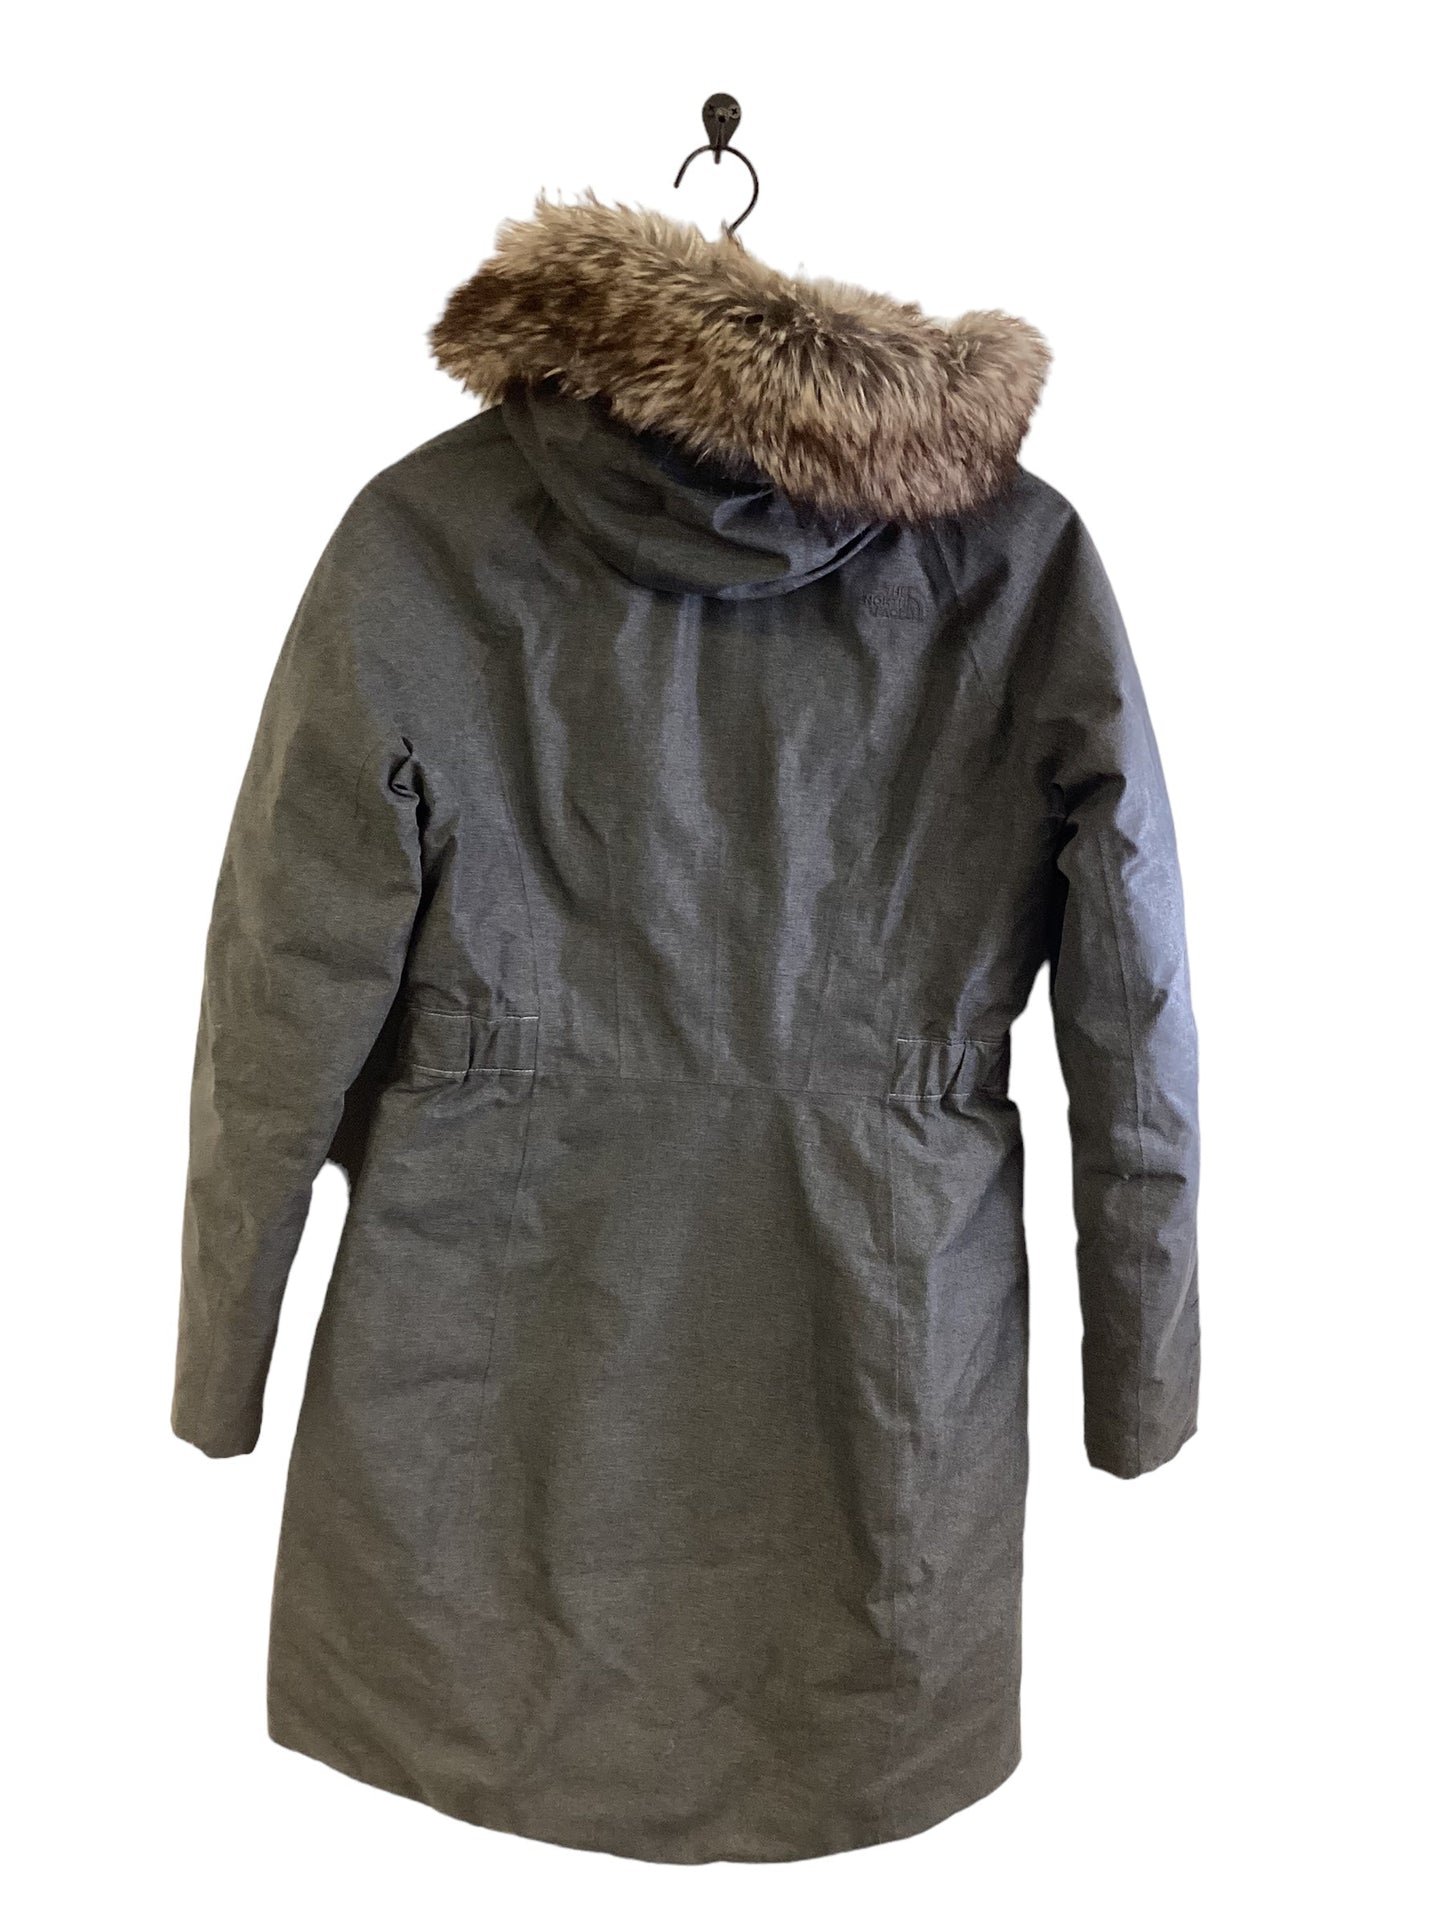 Coat Parka By The North Face  Size: S